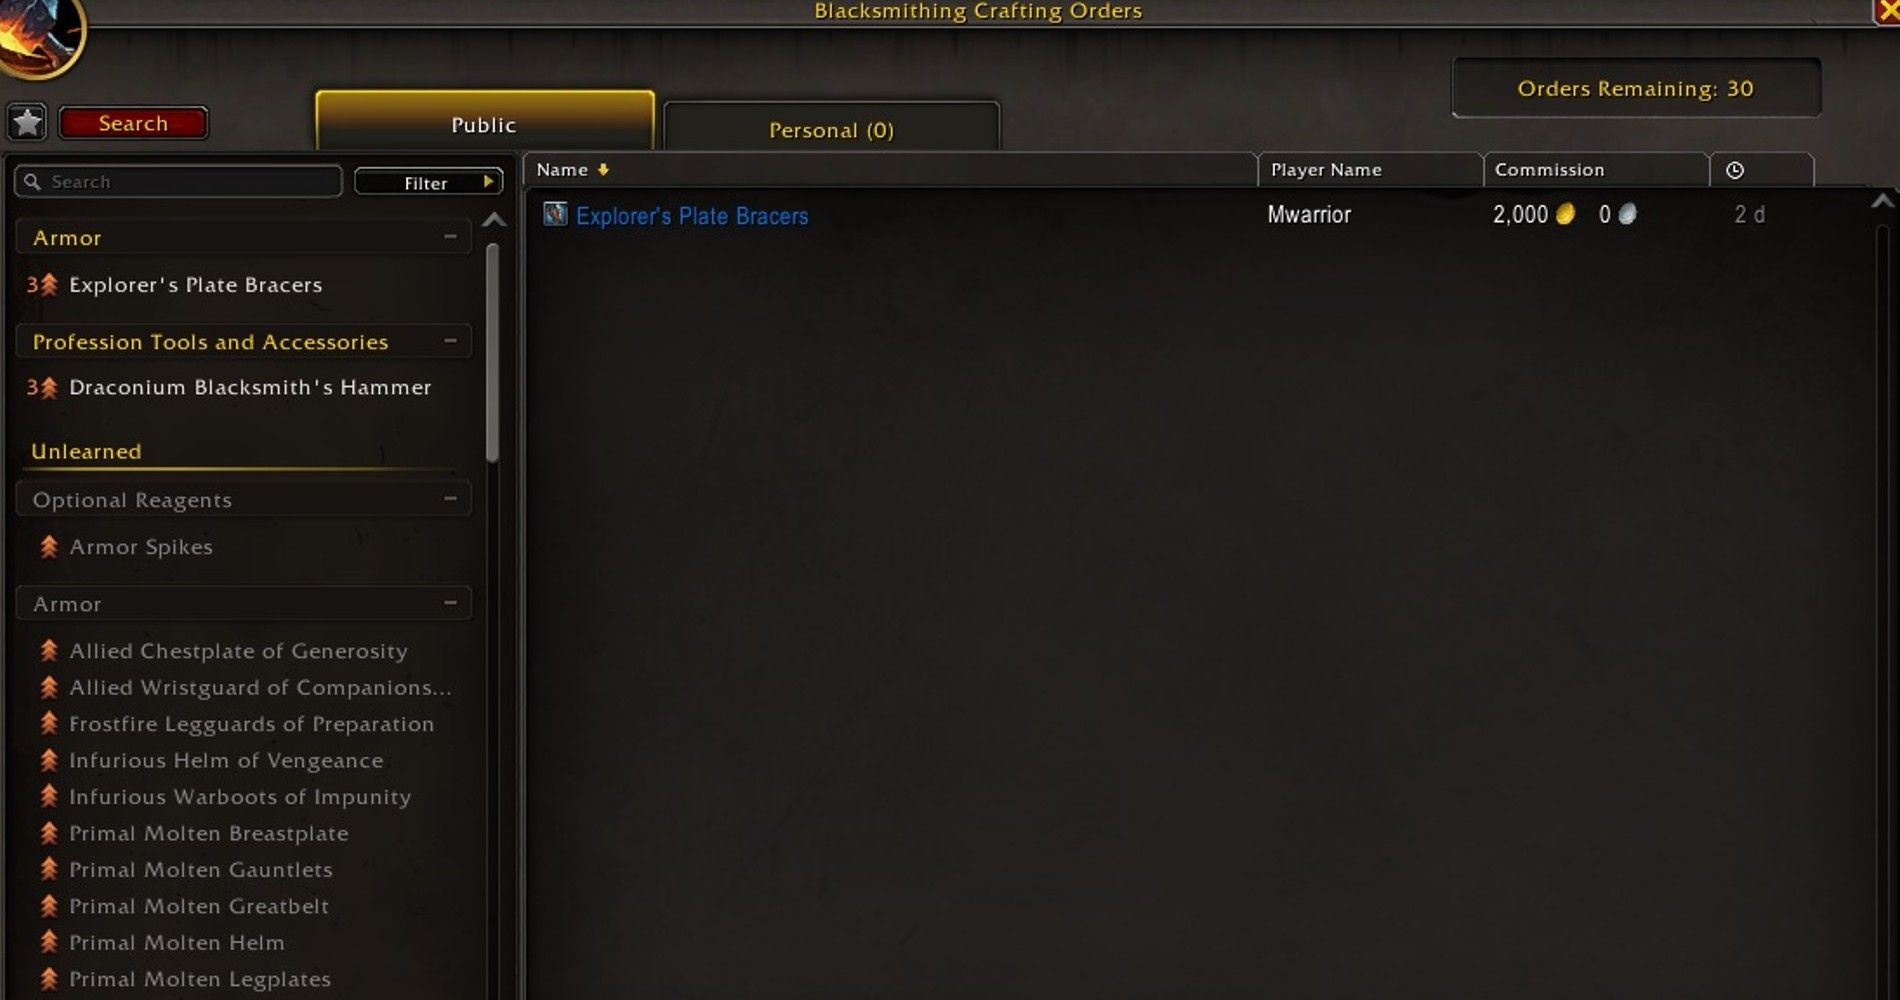 A Blacksmithing Crafting Order from the crafter's perspective in World of Warcraft.